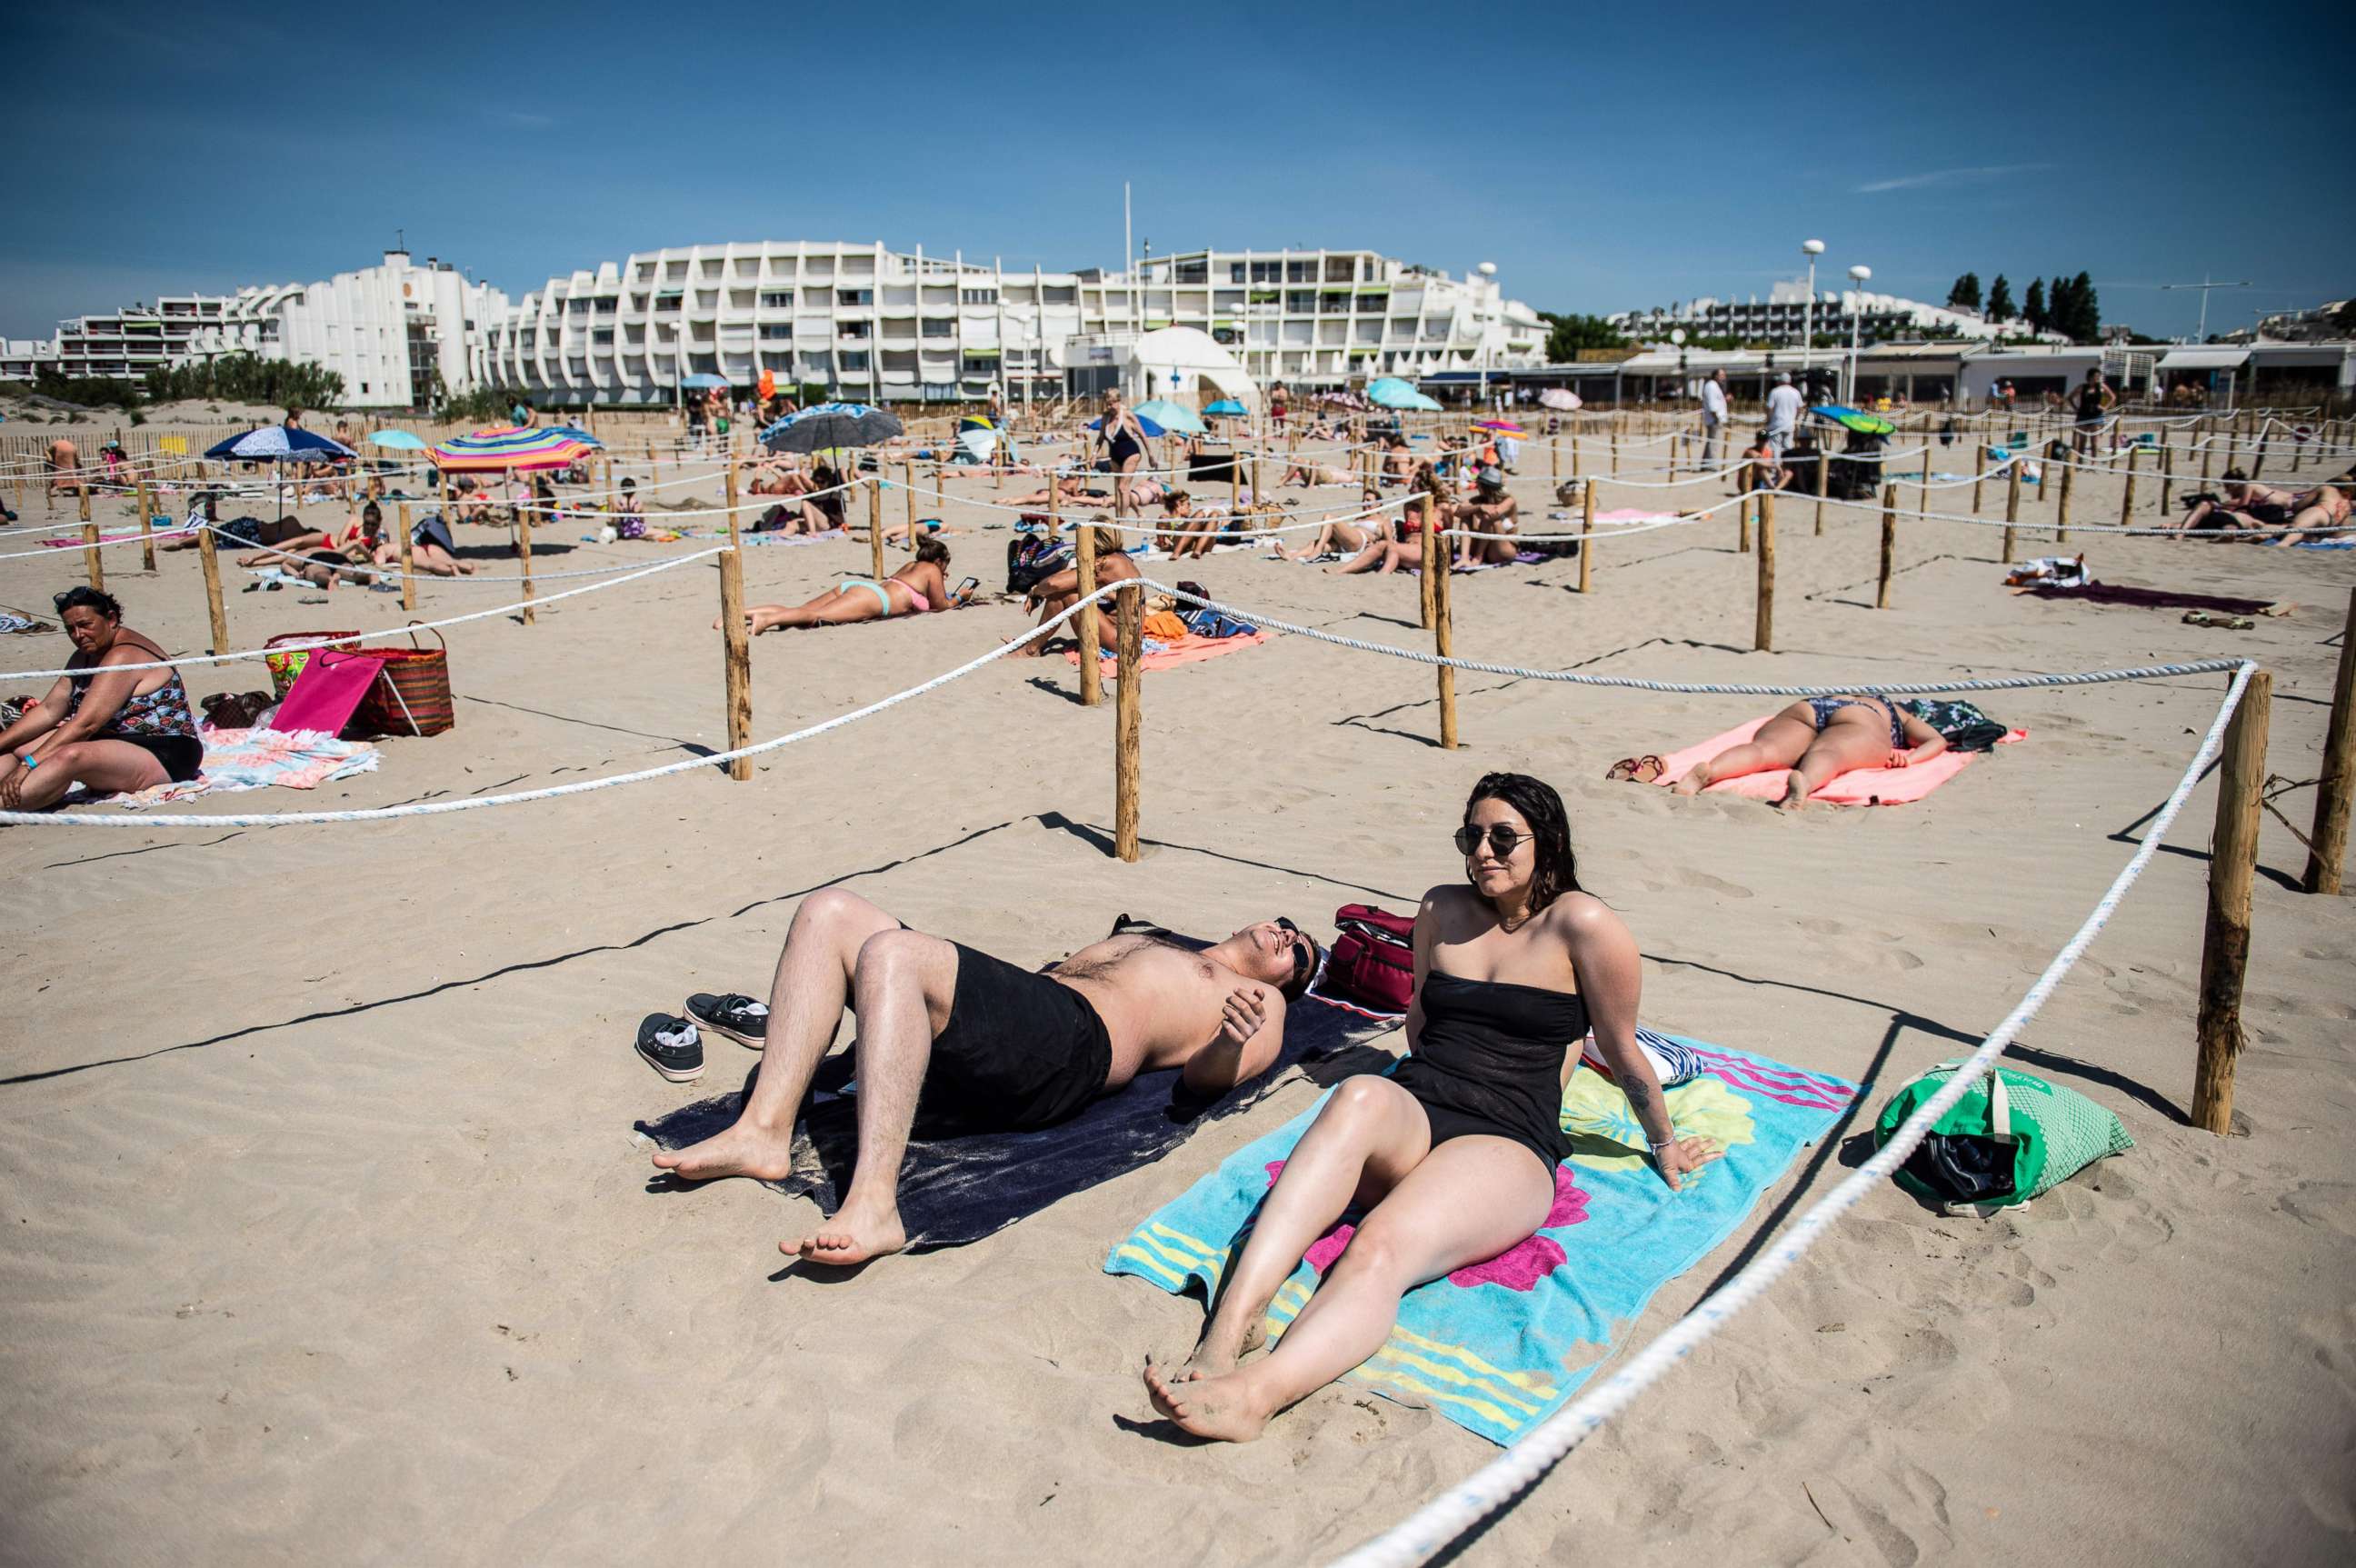 PHOTO: Two people sunbath at 'Couchant or Sunset beach', in a roped off distancing zone marked out by the municipality along the beach in La Grande Motte, southern France, on May 21, 2020.